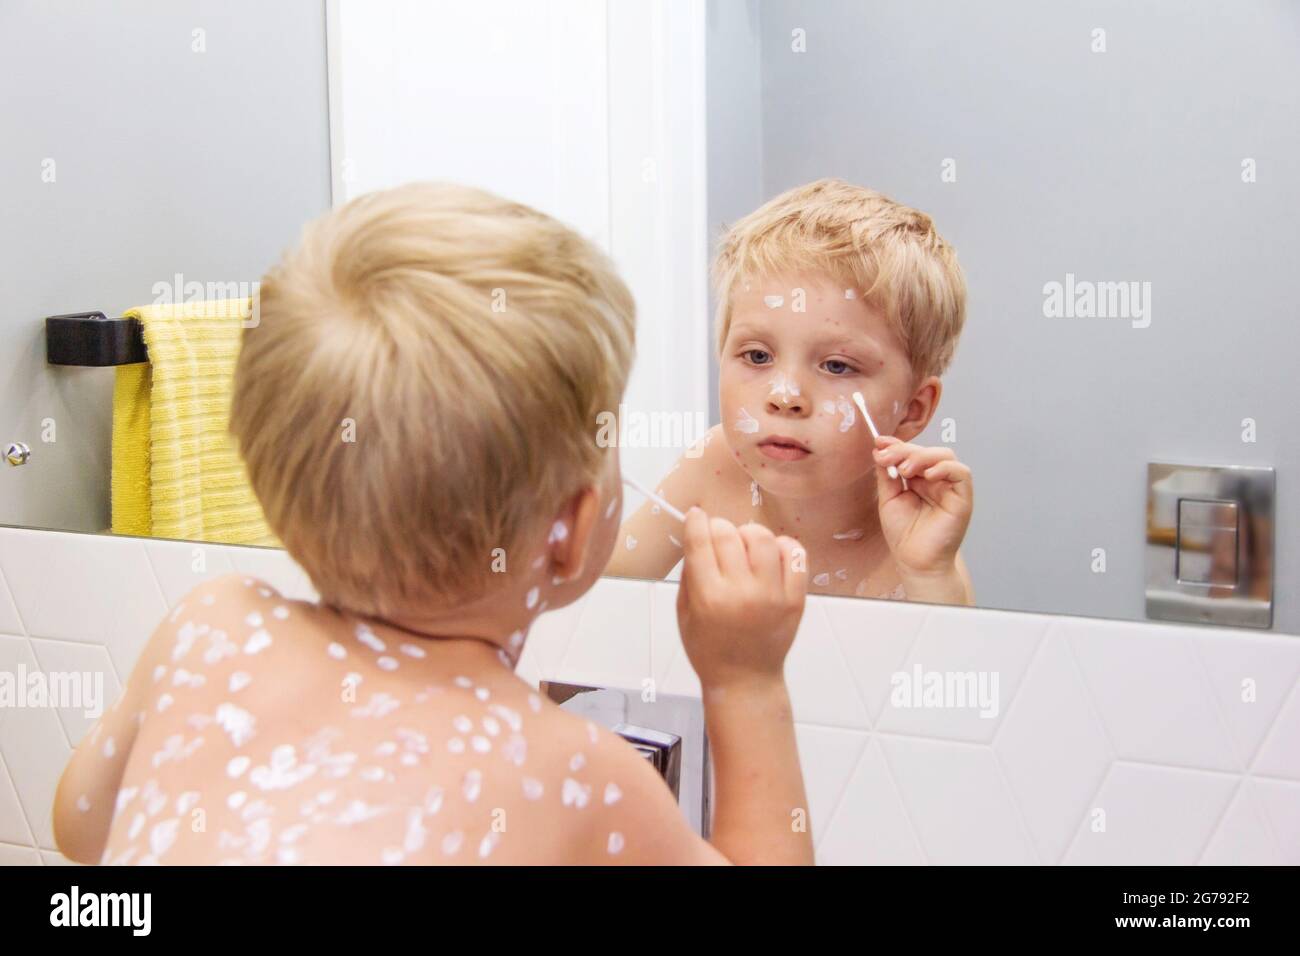 Toddler  blonde boy sick with chickenpox measles on the body uses the medicine. Varicella virus childhood contagious disease. Itchy red blisters, feve Stock Photo